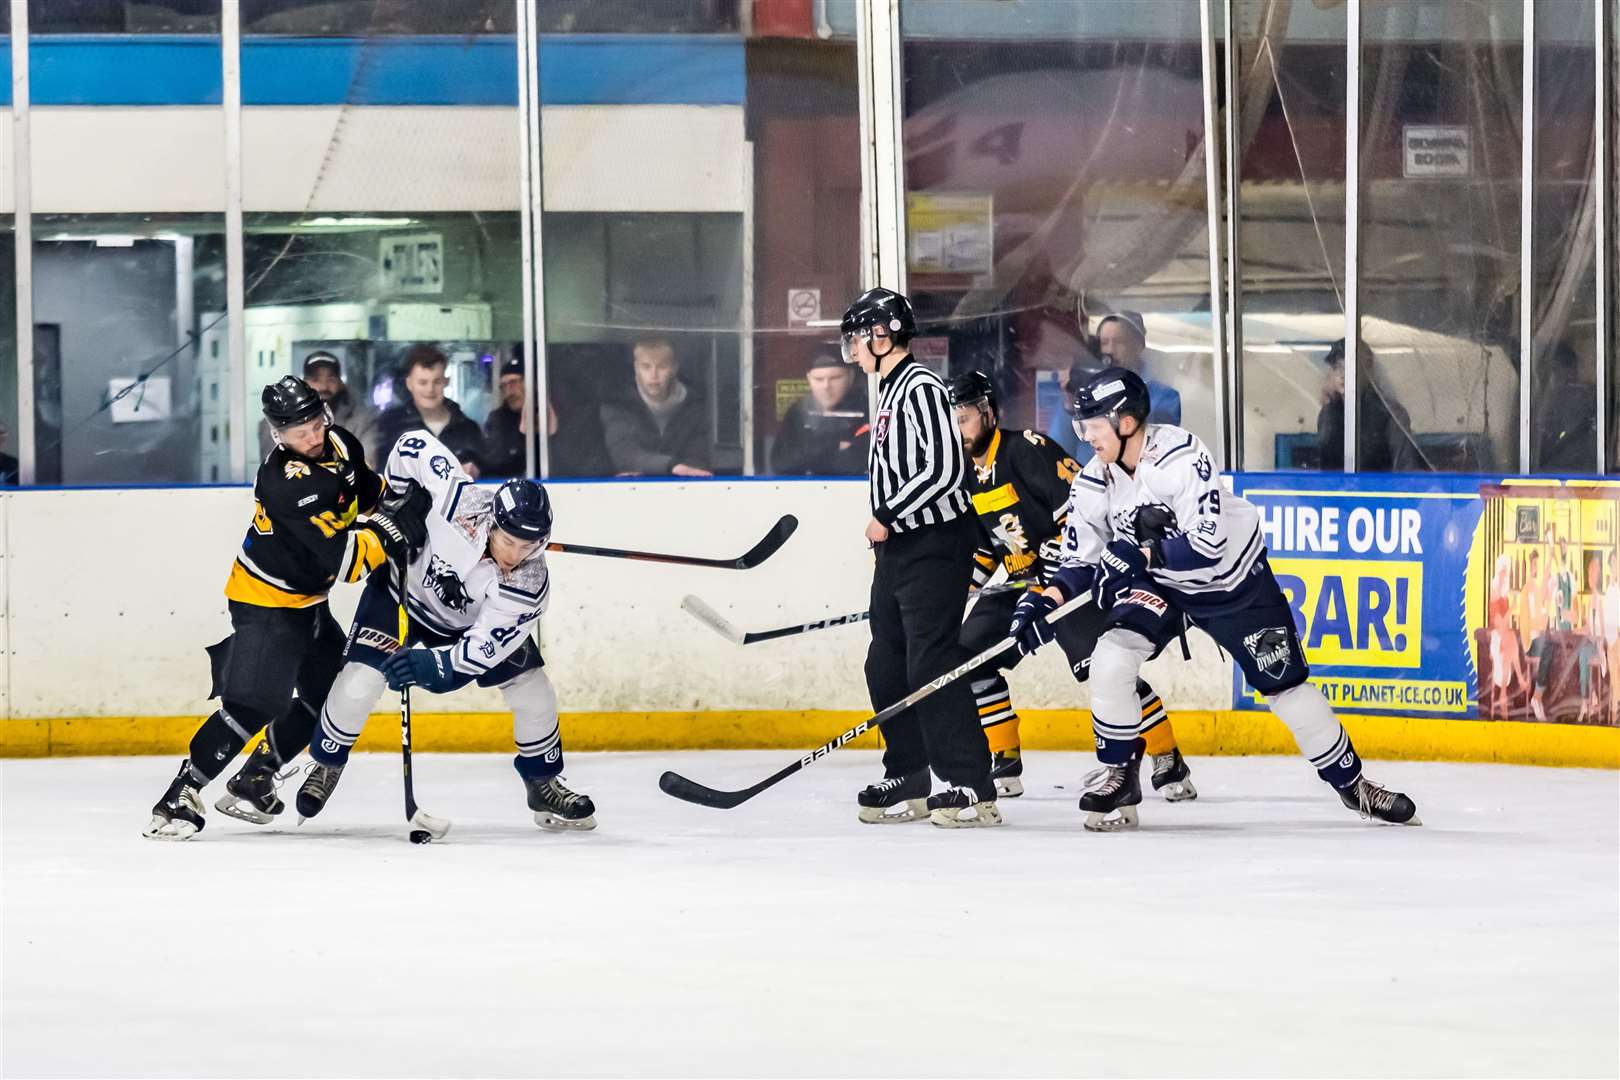 Invicta Dynamos up against the Chieftains in Gillingham Picture: David Trevallion